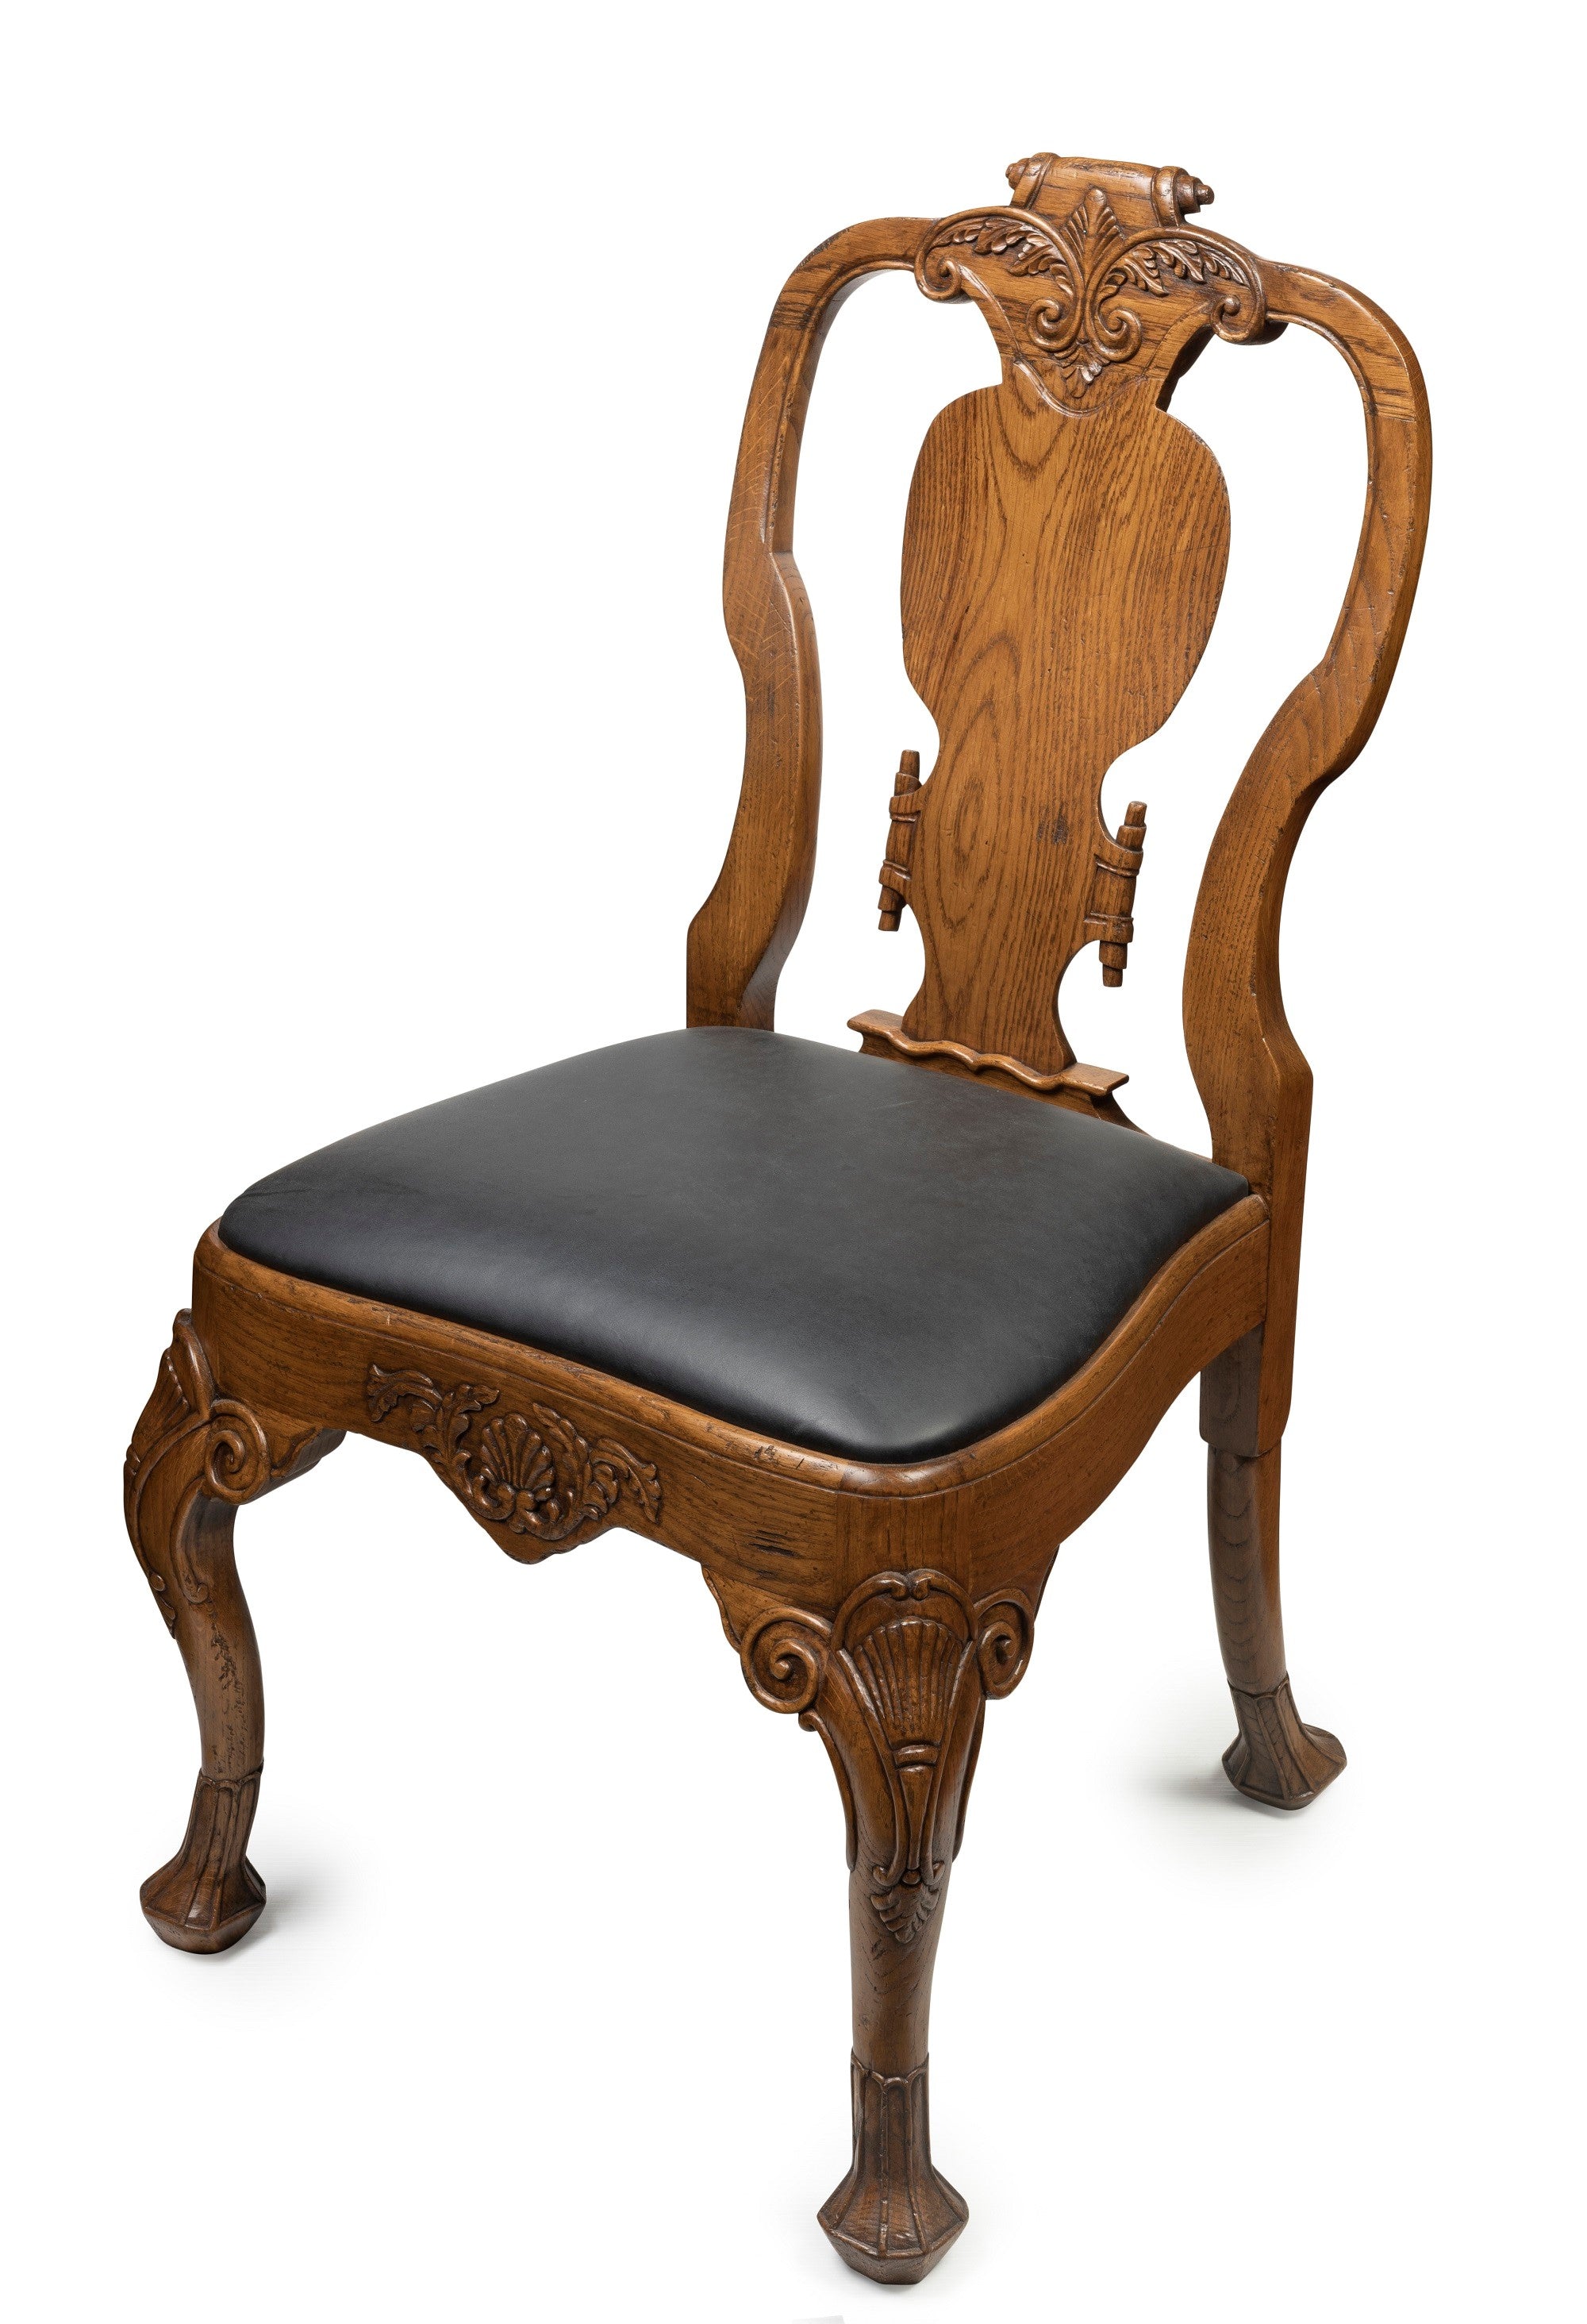 A Queen Anne Style Dining Chair